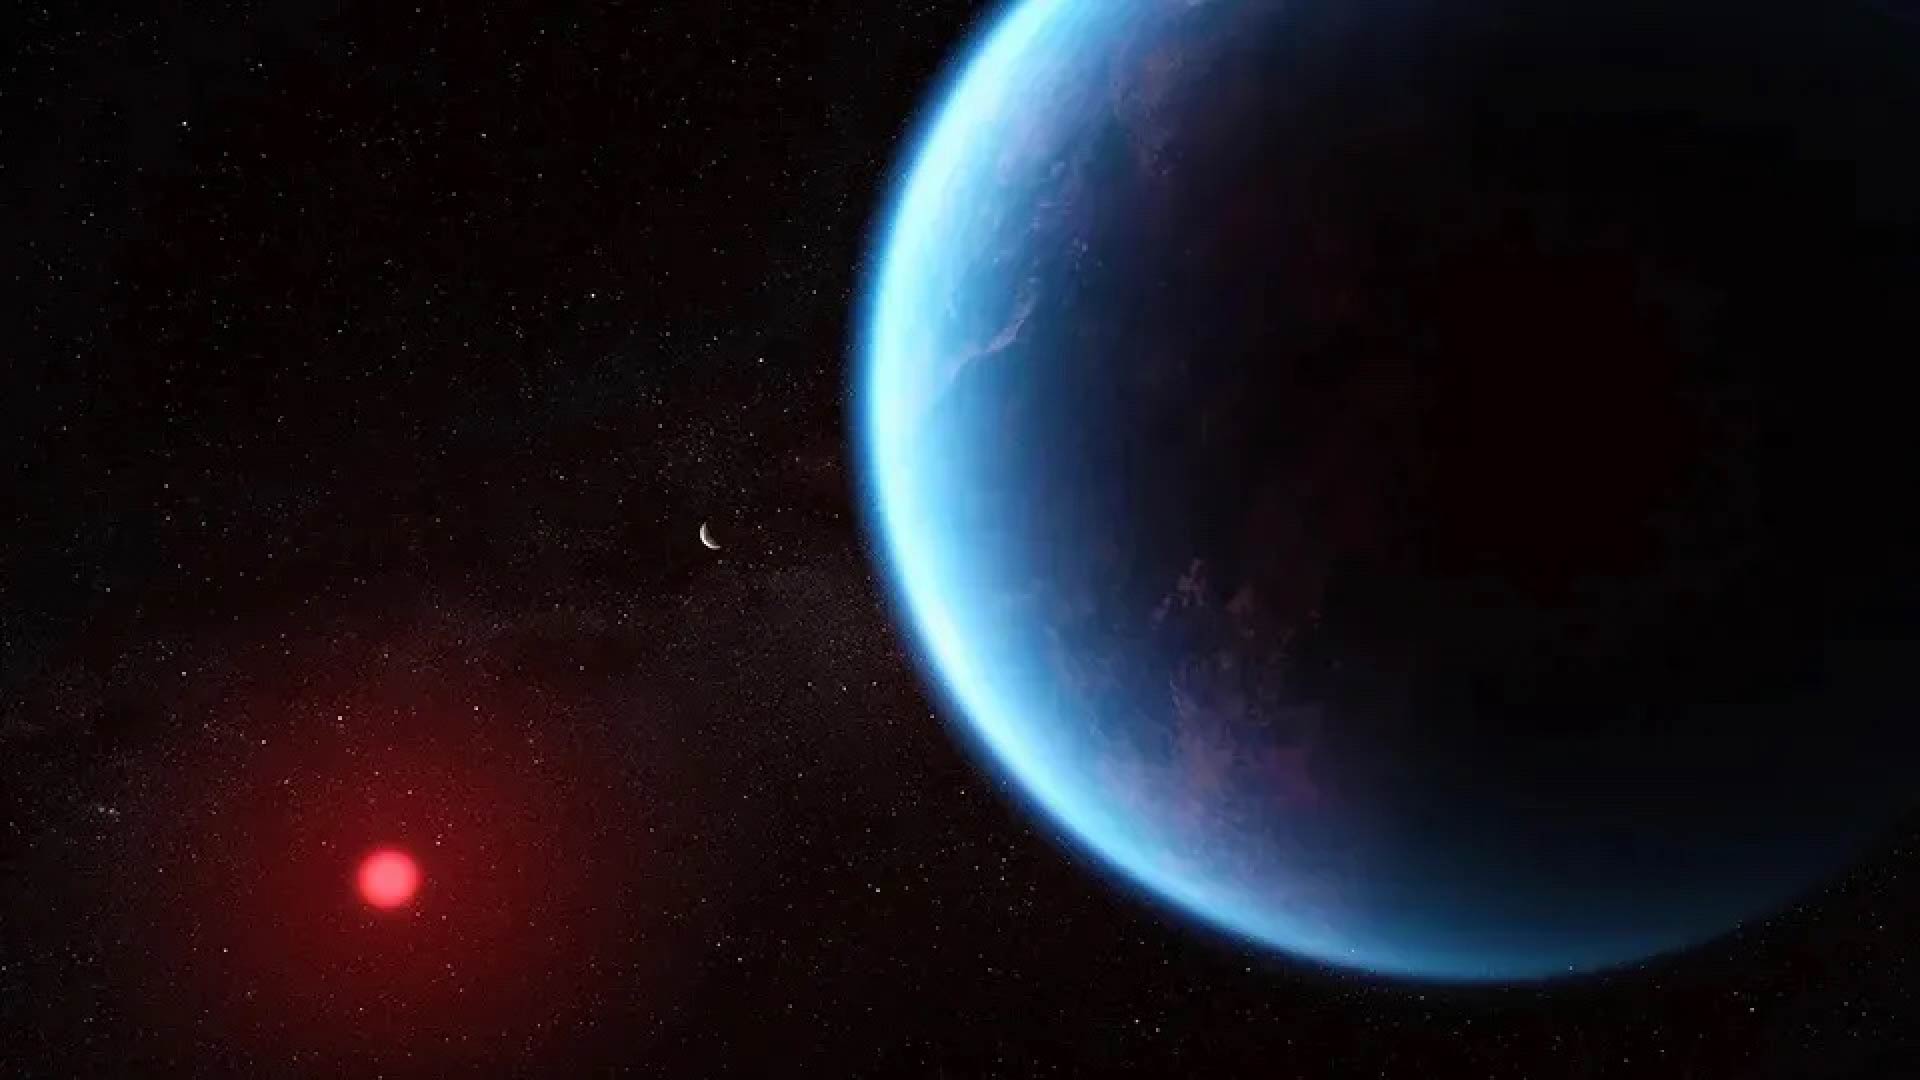 An artist's rendering of exoplanet K2-18b. It is blue and lit by a red star in the distance, and there is a tiny white crescent moon shape in the distance.